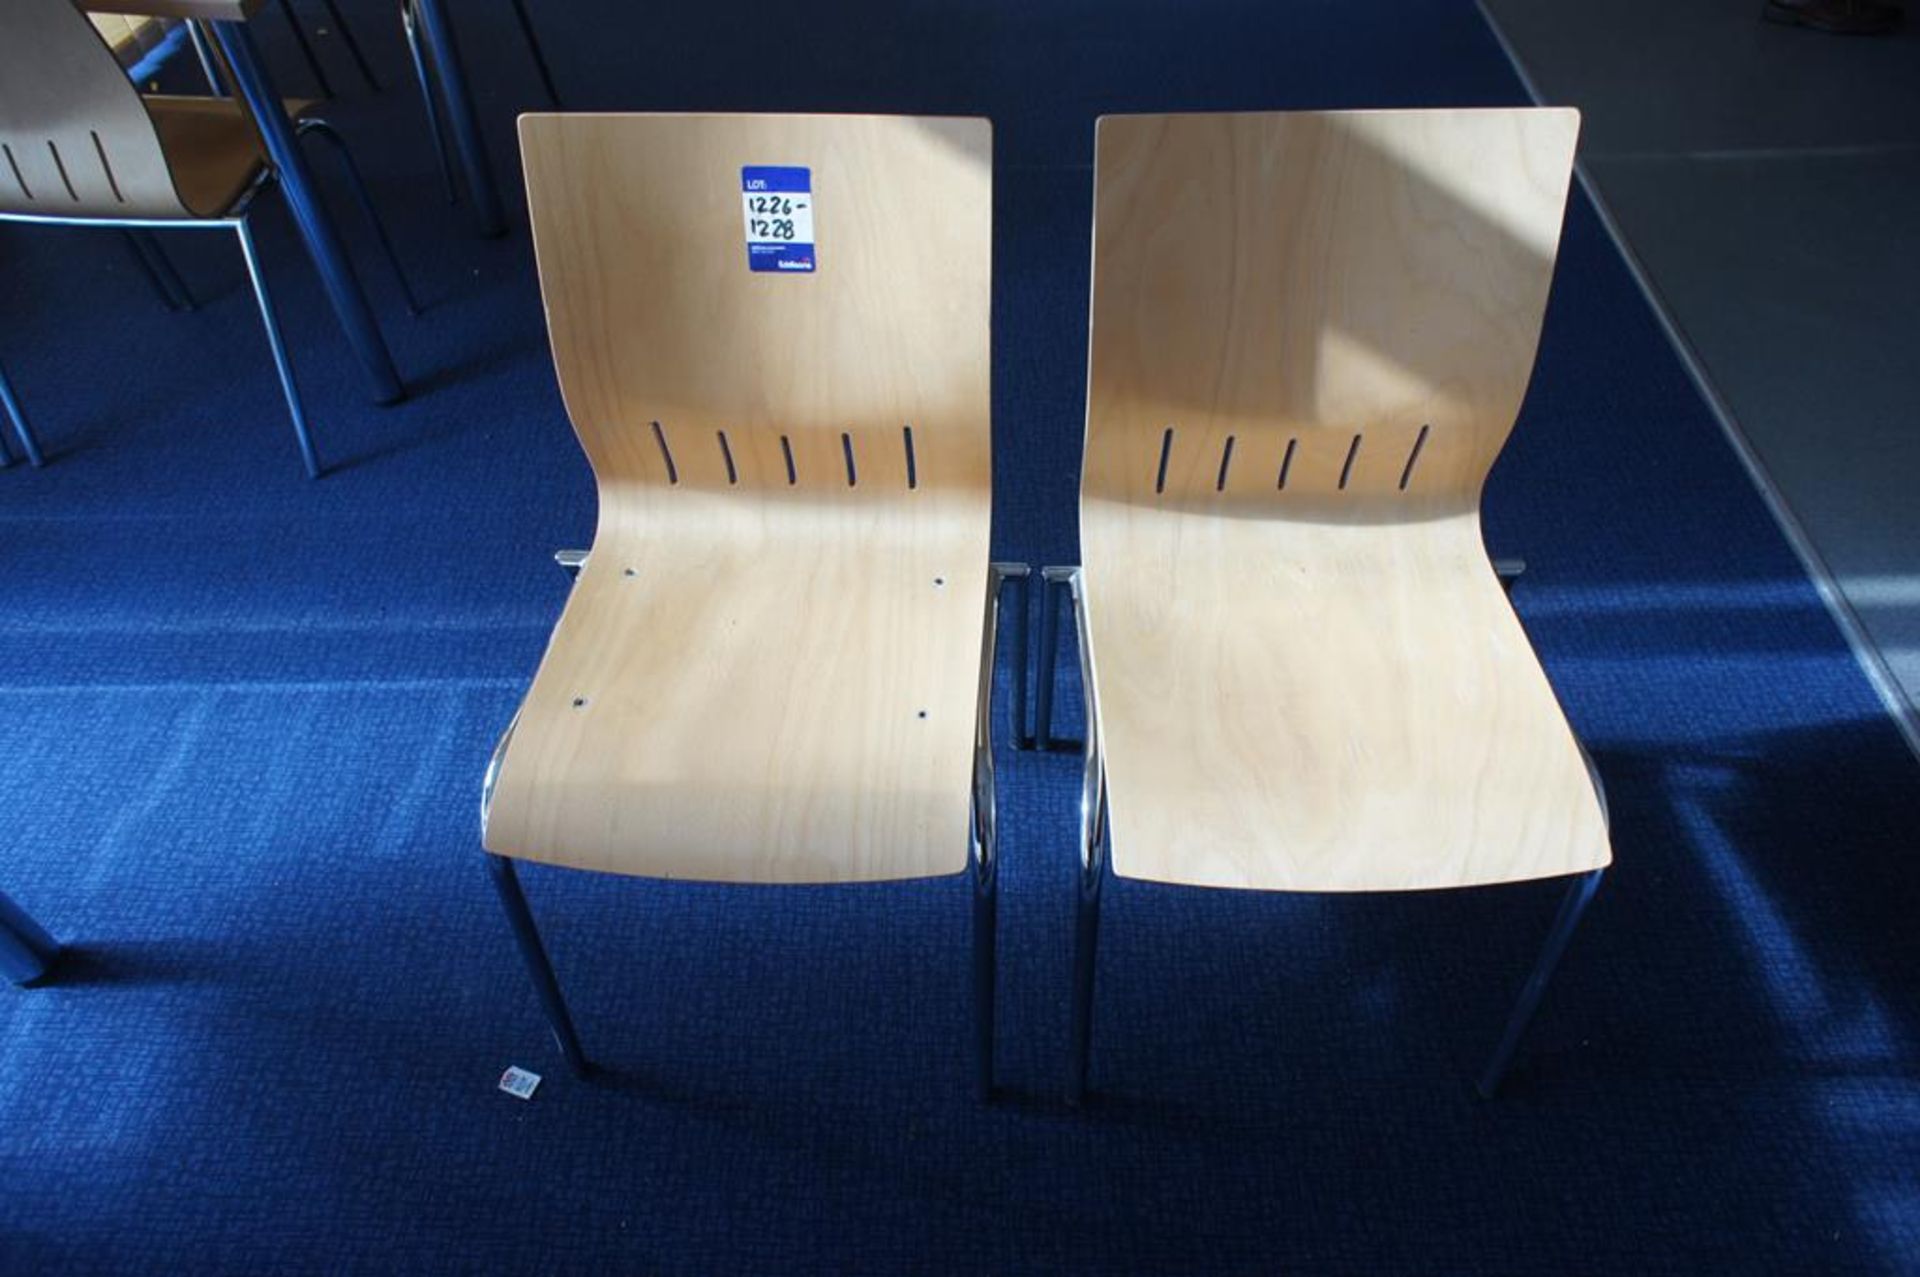 * 3 x Senator Beech Effect Chairs Photographs are provided for example purposes only and do not